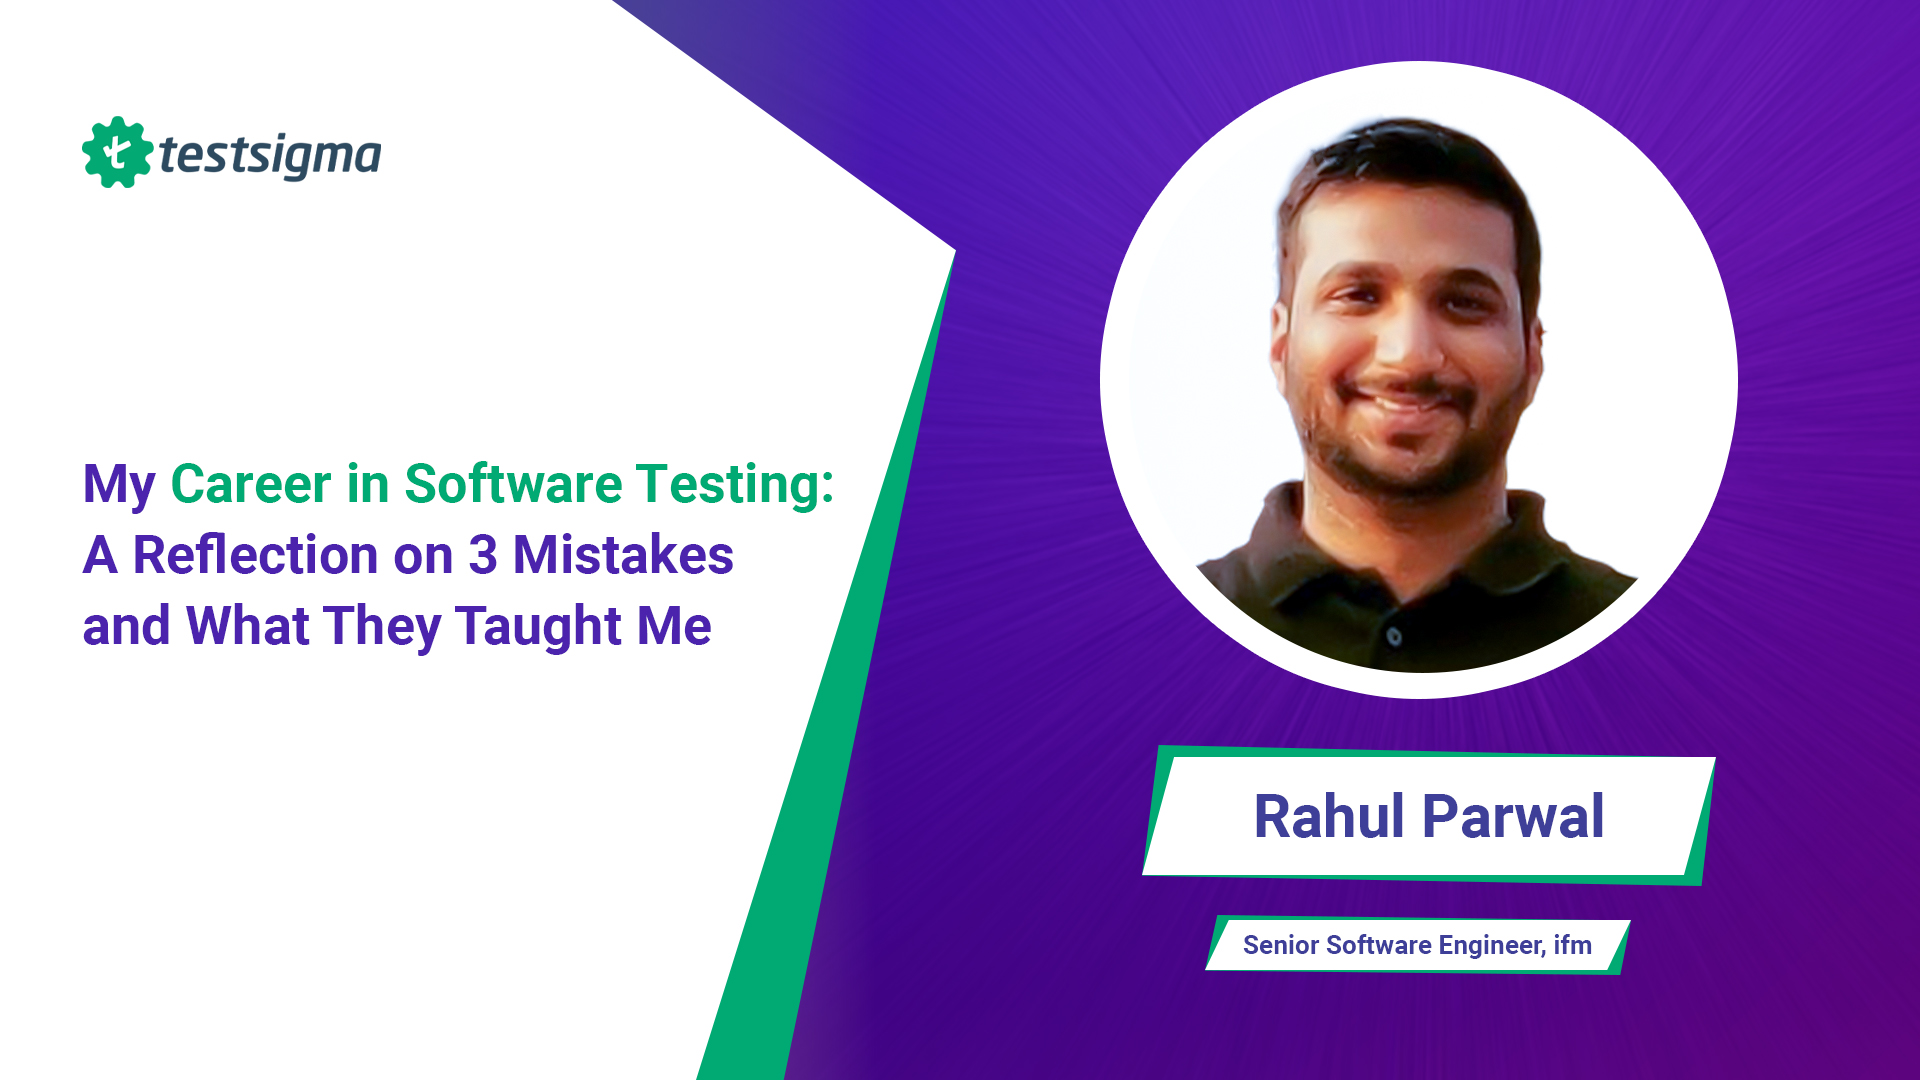 My Career in Software Testing: A Reflection on 3 Mistakes and What They Taught Me